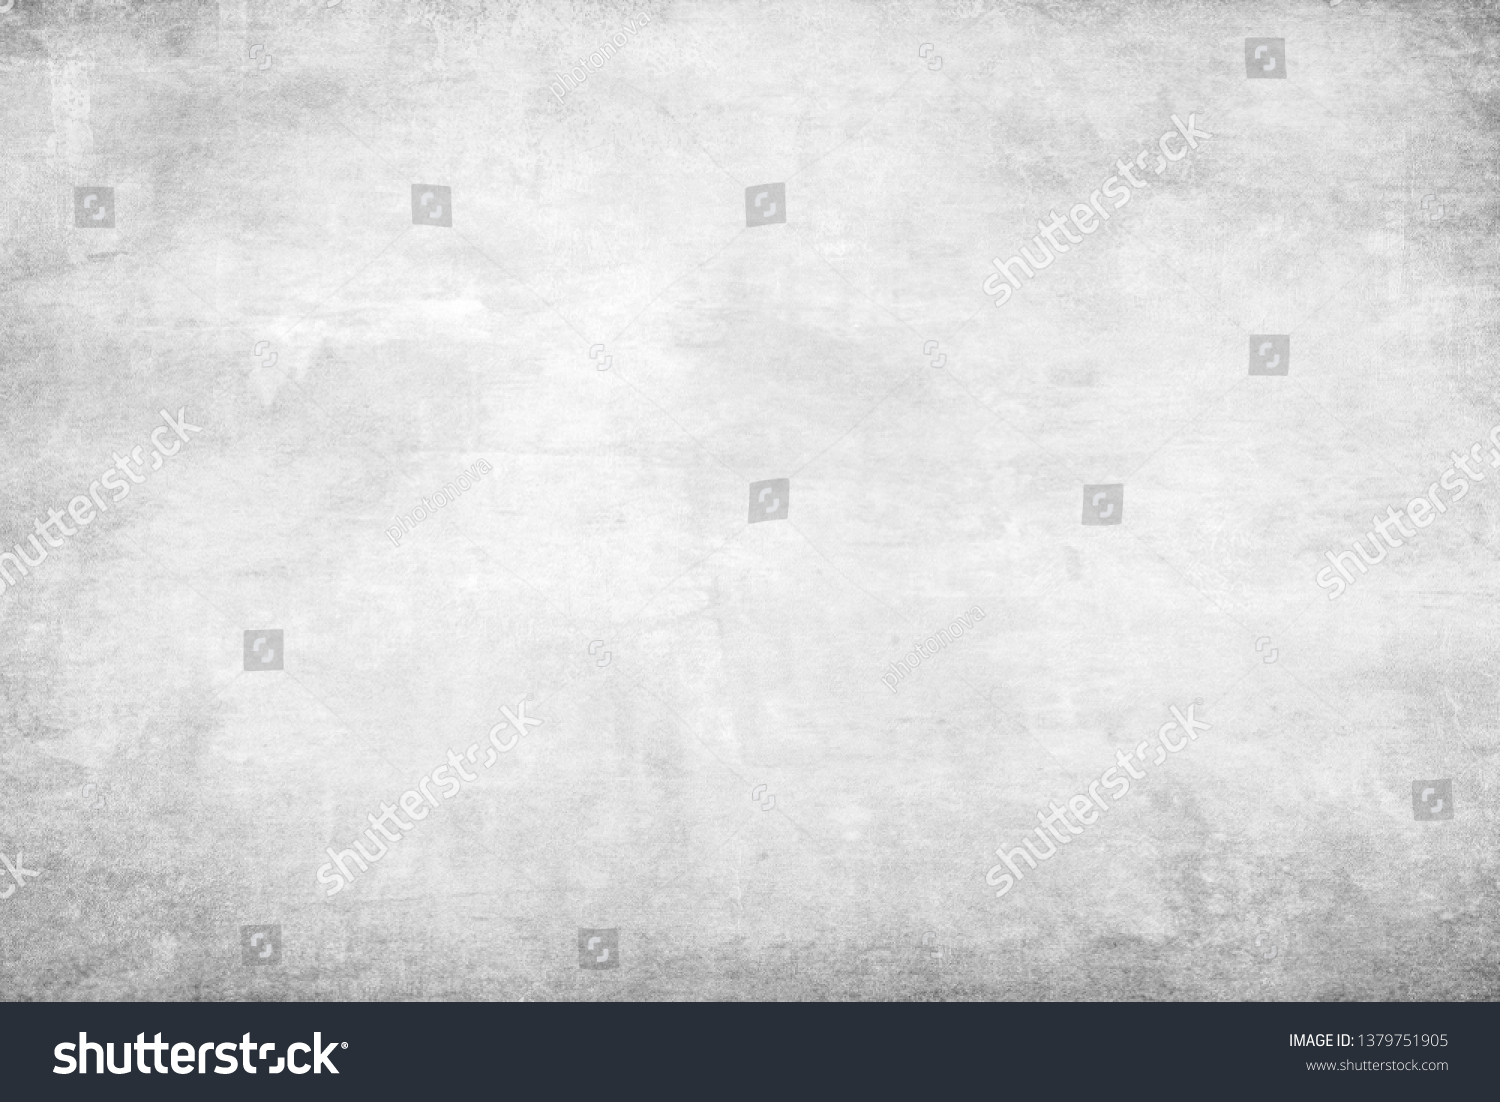 Monochrome texture with white and gray color. Grunge old wall texture, concrete cement background. #1379751905